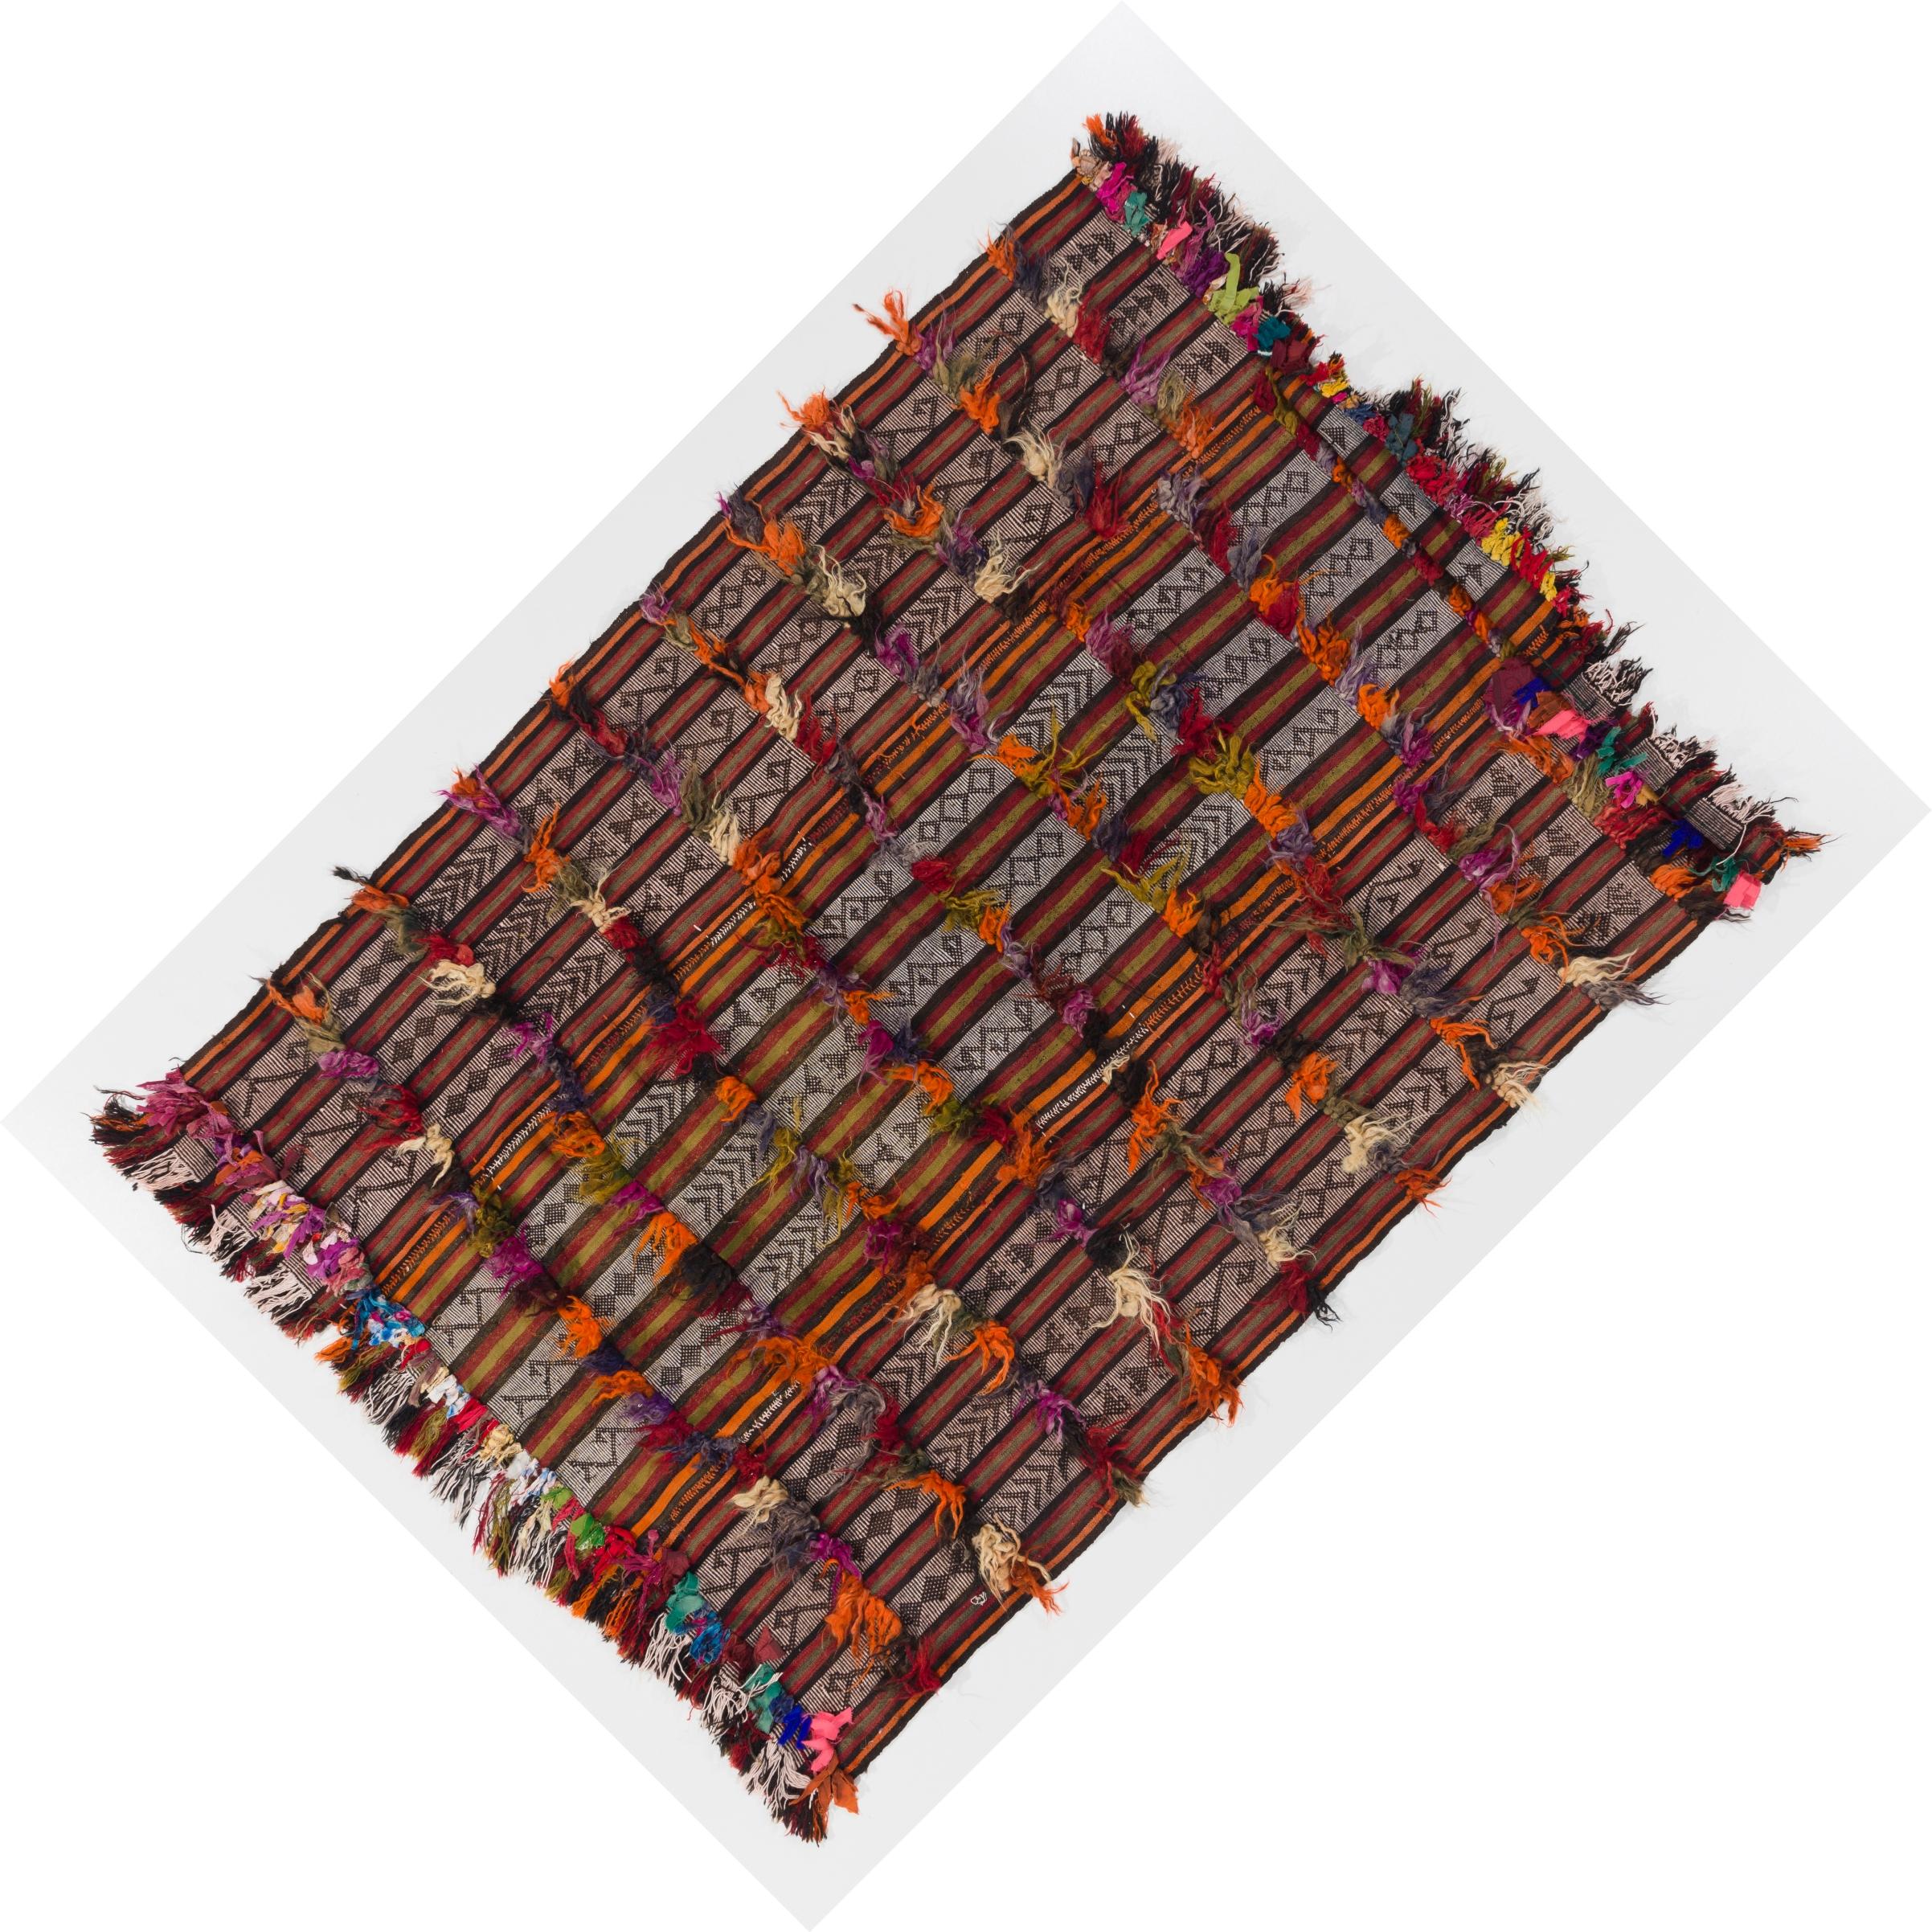 Hand-Woven 3.7x5.2 Ft Striped Handmade Anatolian Kilim Rug with Wool and Cotton Poms For Sale